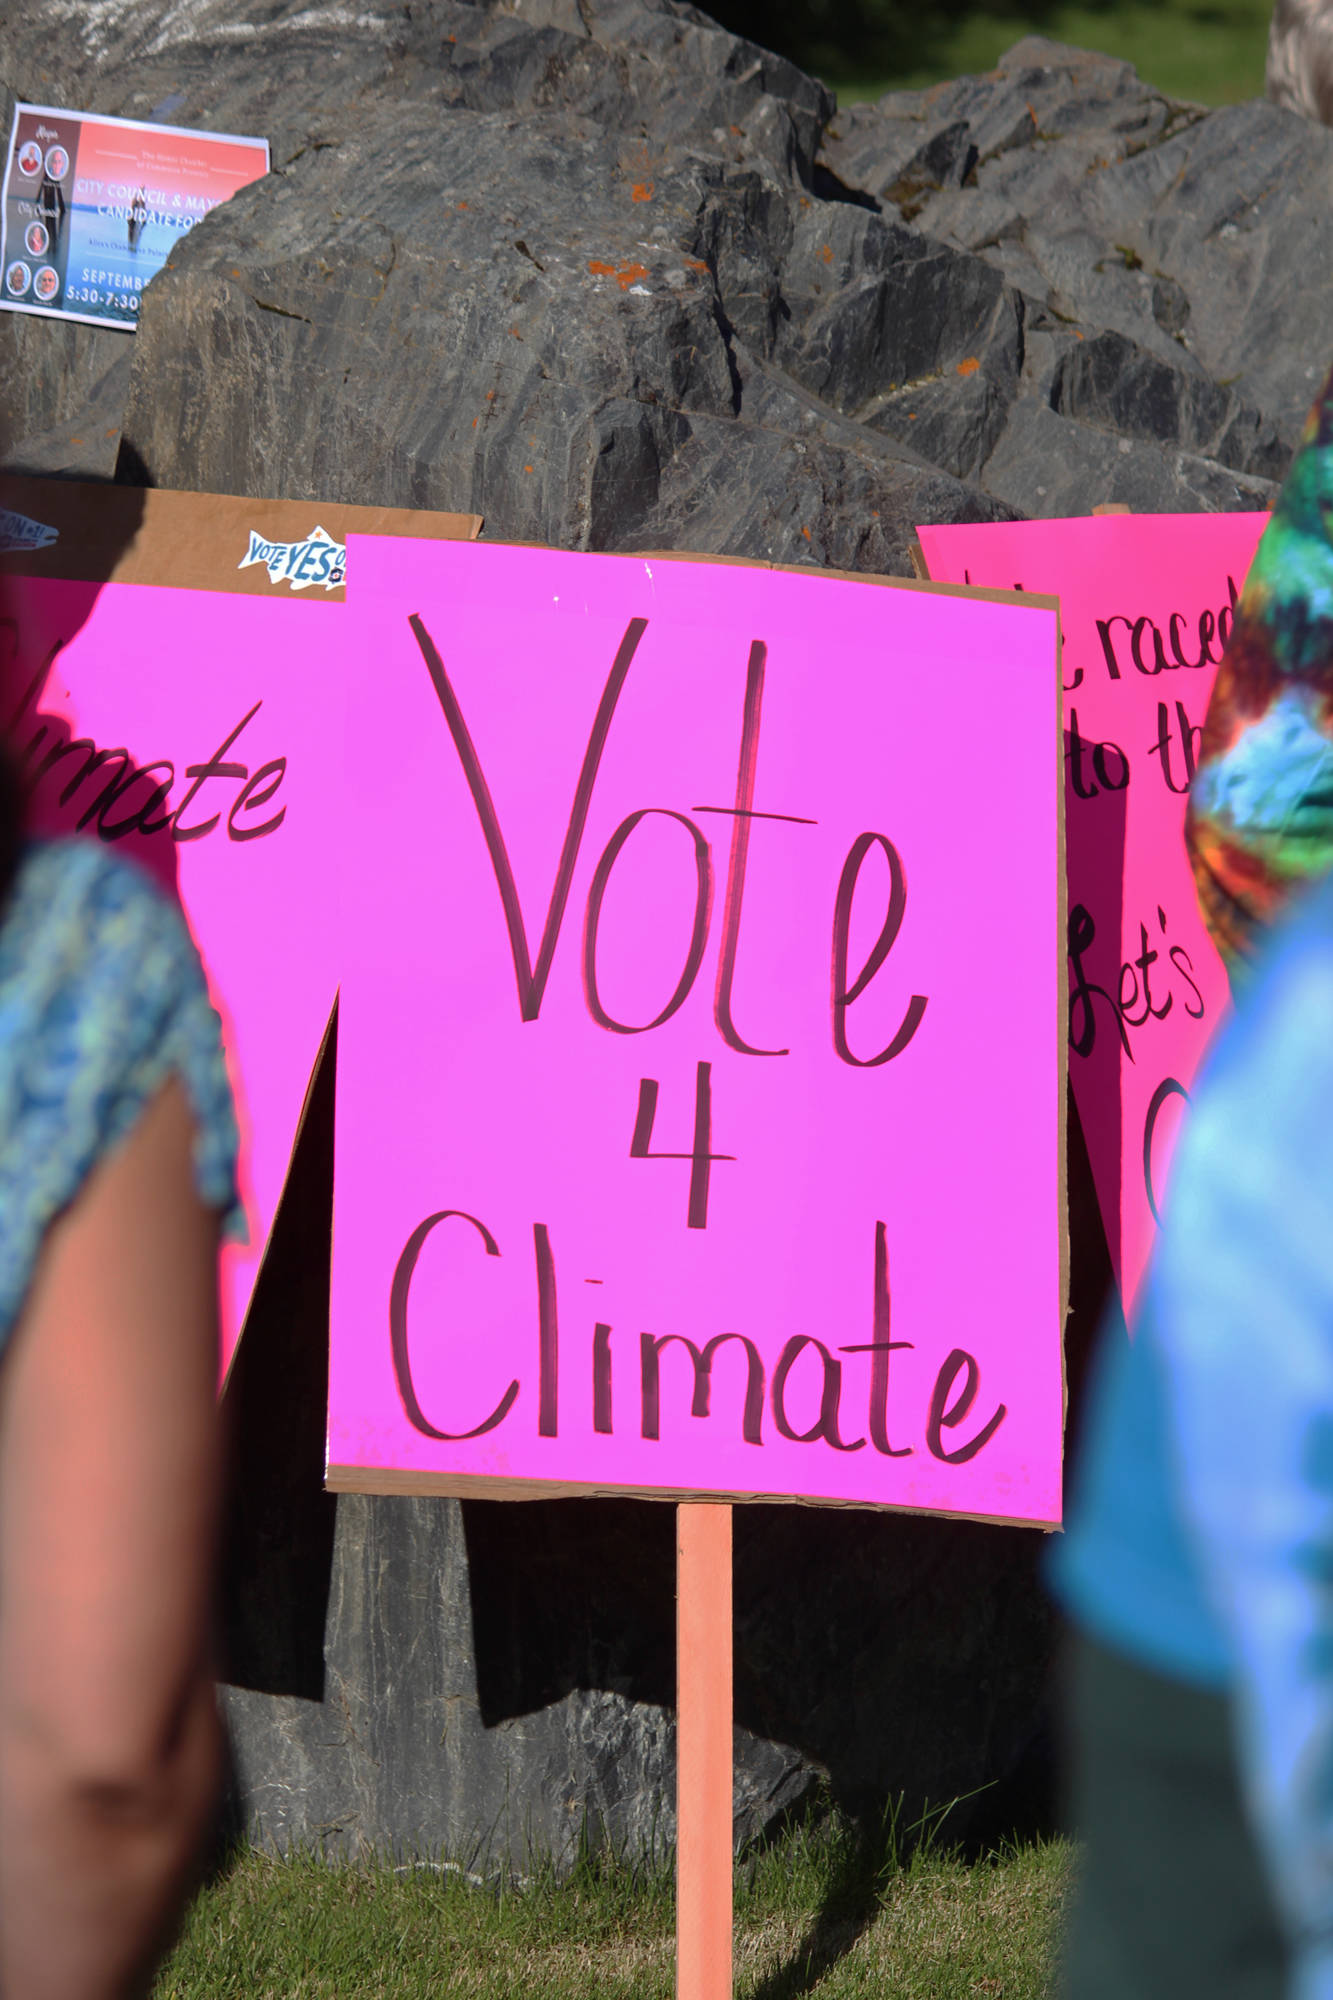 Several signs including this one which reads “Vote 4 Climate” lean up against a rock in WKFL Park on Saturday, Sept. 8, 2018 during the Rise for Climate, Jobs and Justice rally and march in Homer, Alaska. Larger rallies and marches were held nationally that day. (Photo by Megan Pacer/Homer News)